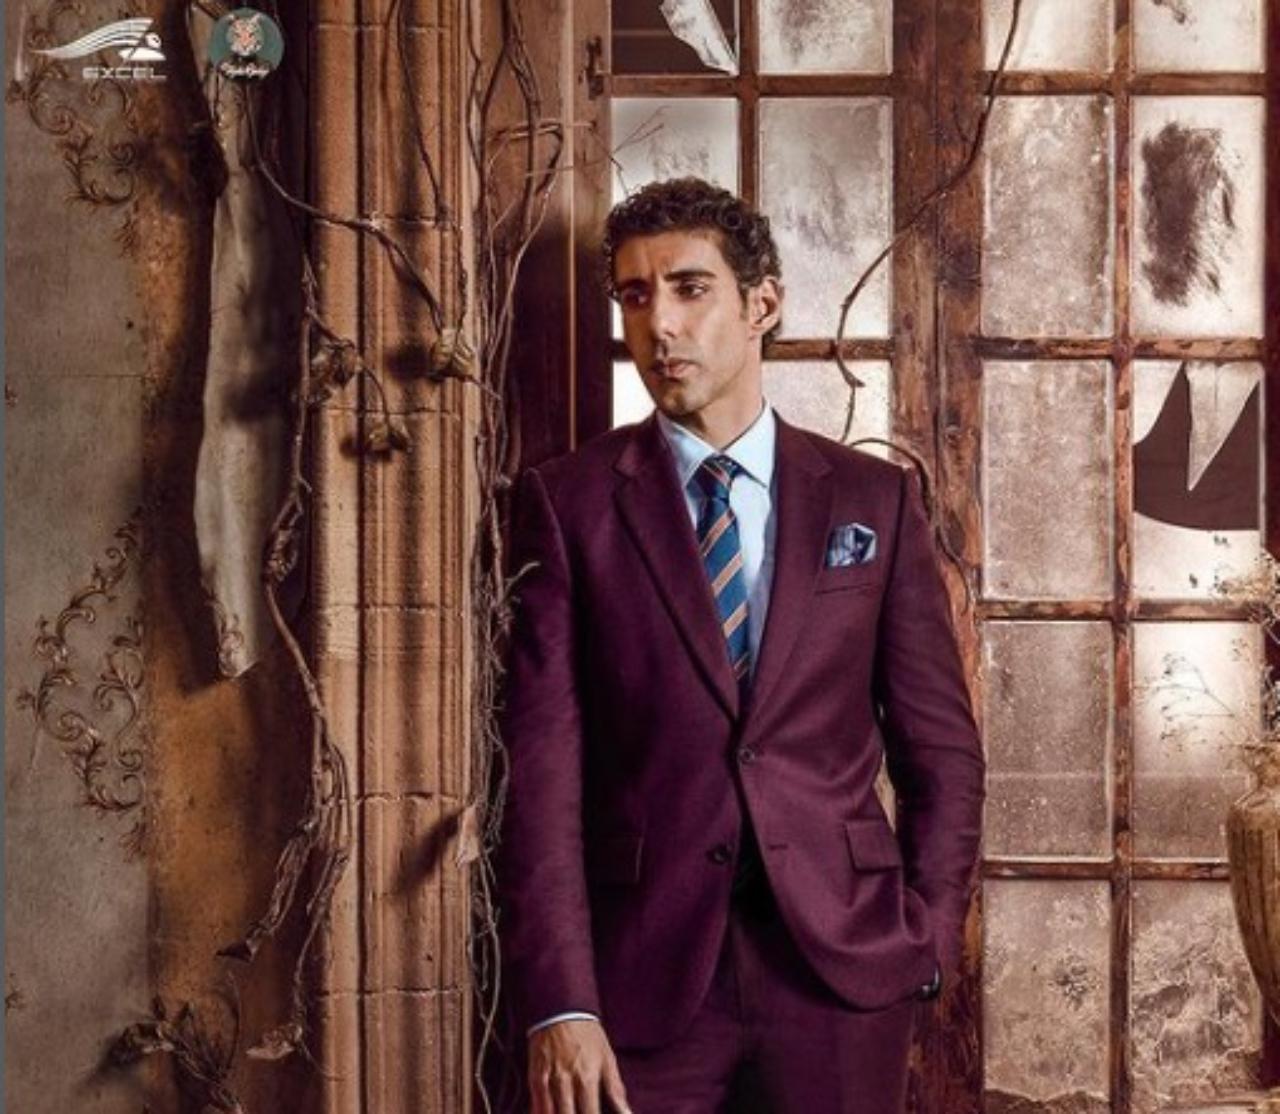 Made in Heaven
Jim Sarbh delivered another riveting performance as Adil Khanna in 'Made in Heaven.' A business tycoon married to Tara, founder-partner of wedding consulting agency 'Made in Heaven' and one of the protagonists of the eponymous show, he cheats on his wife with her best friend, Faiza
'